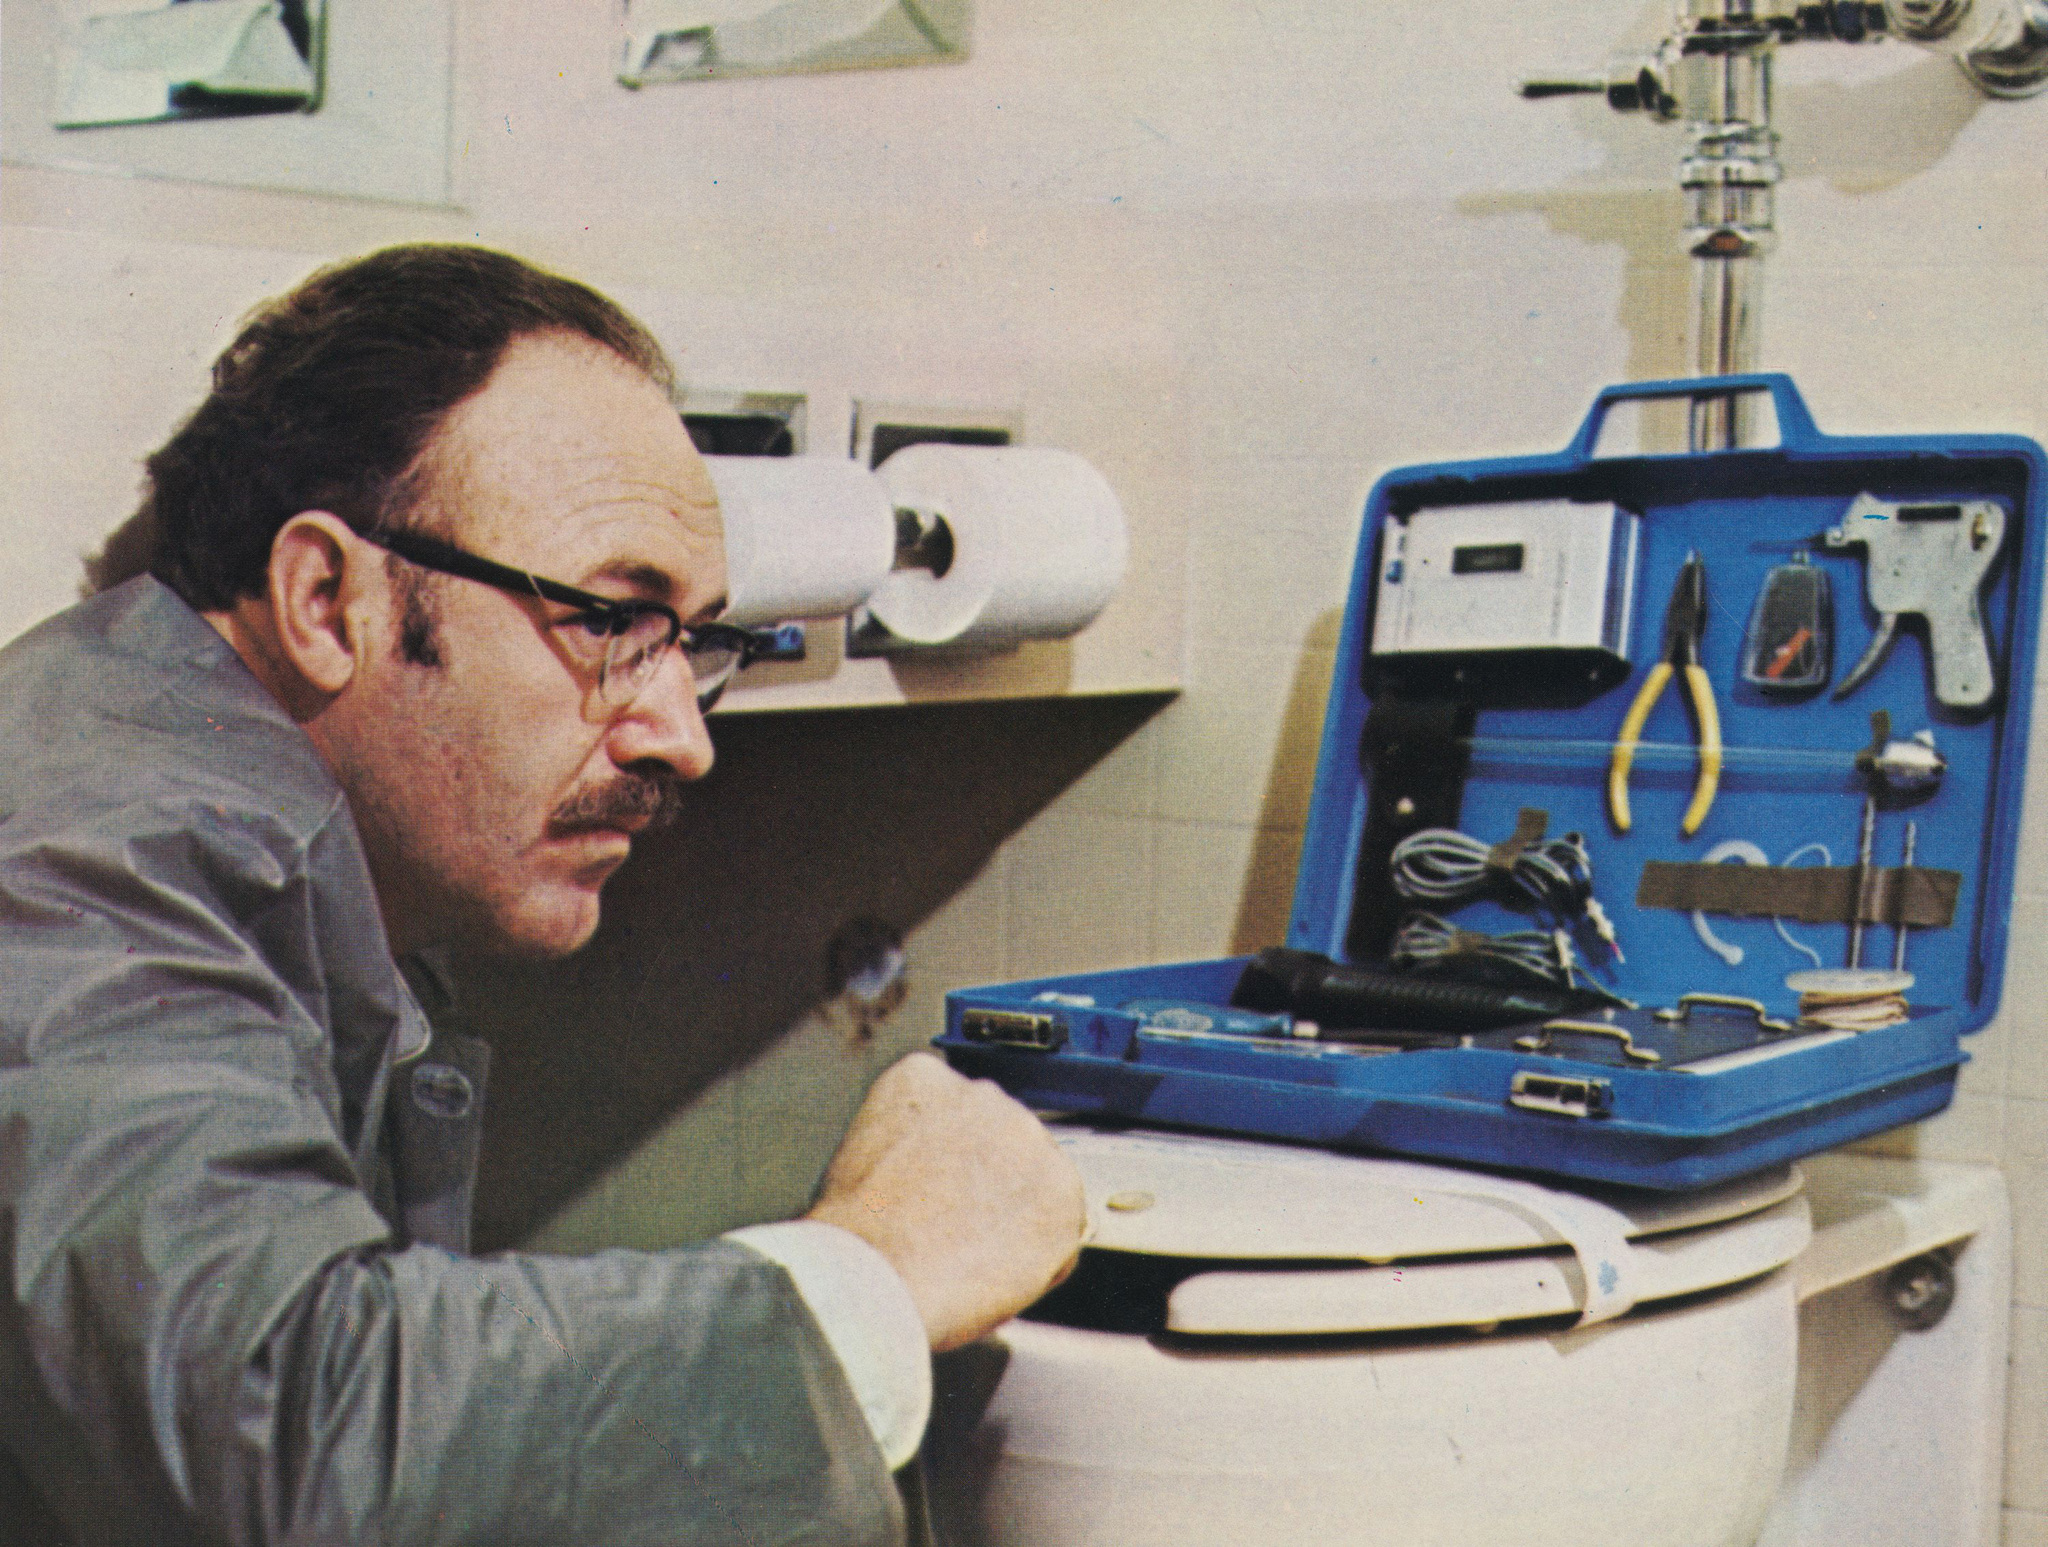 Gene Hackman opening up a toolbox on top of a toilet in The Conversation (1974)